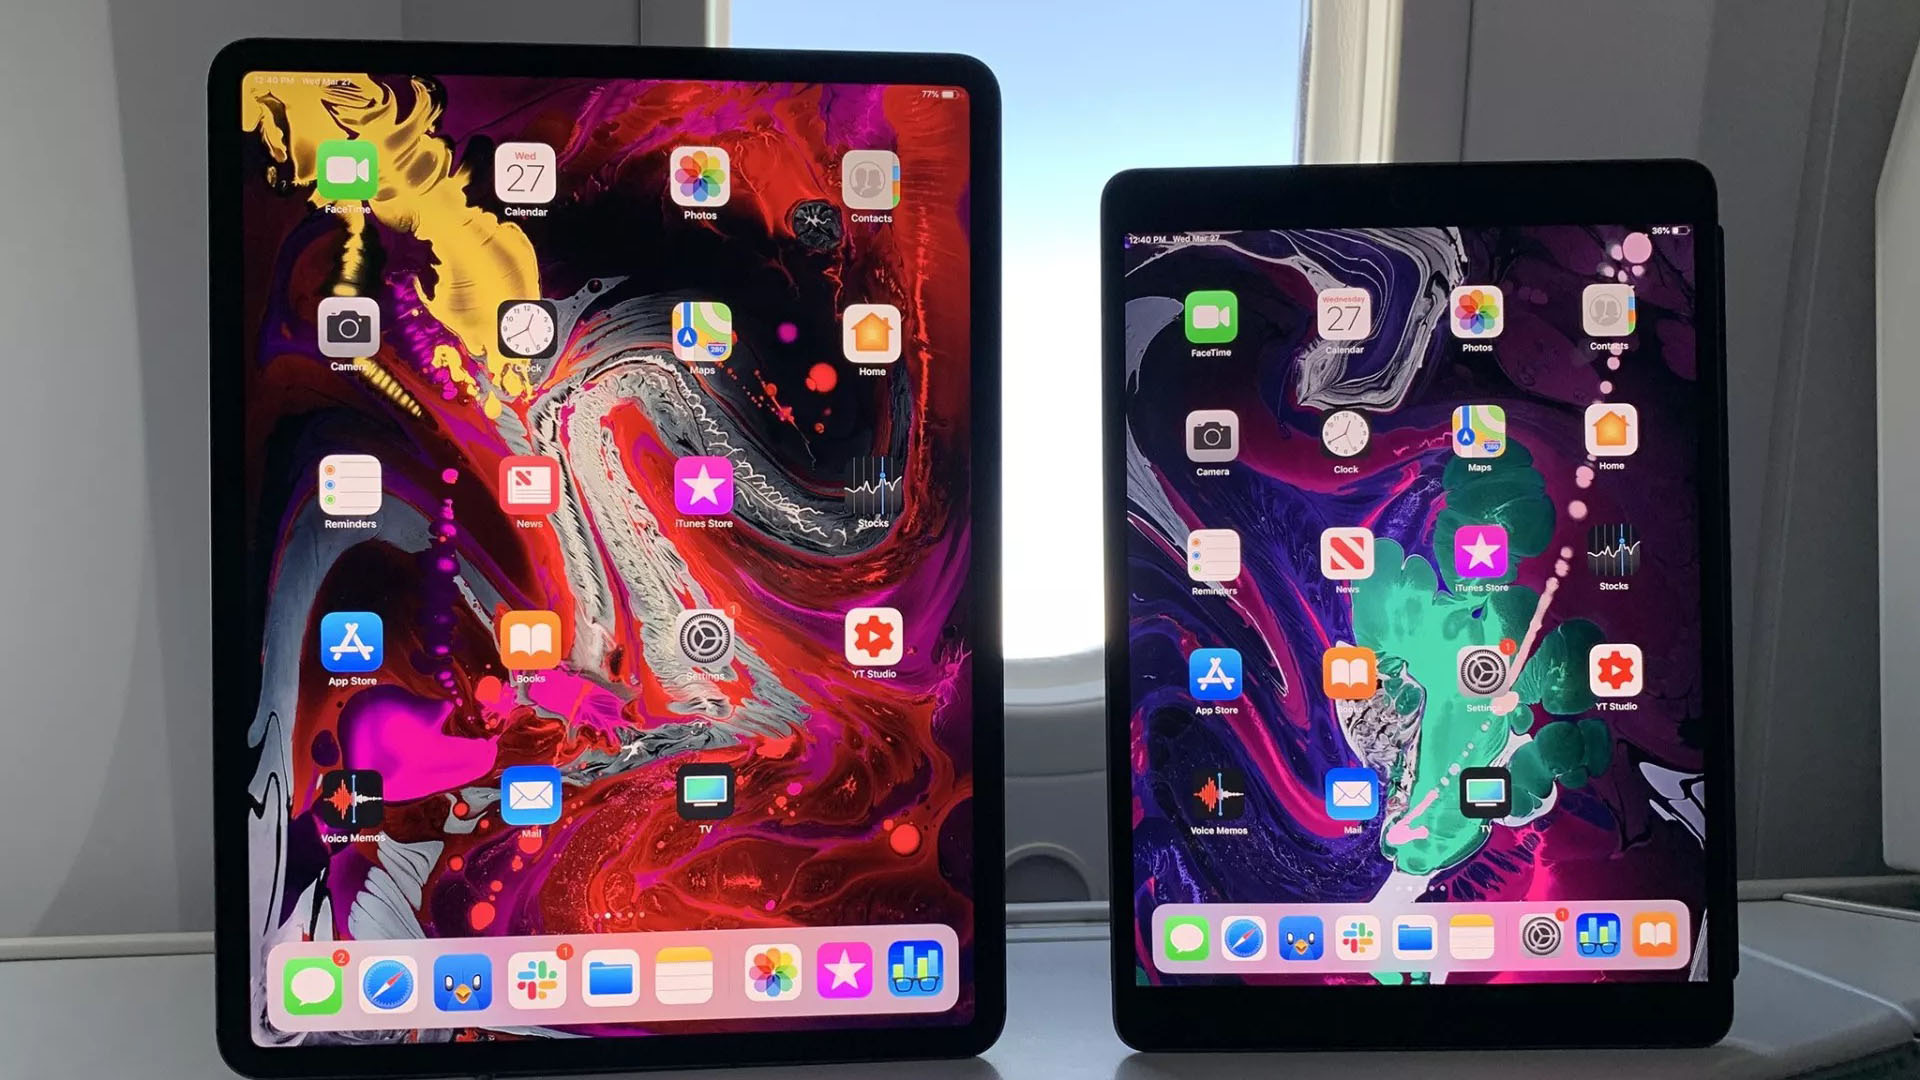 Two iPads side by side